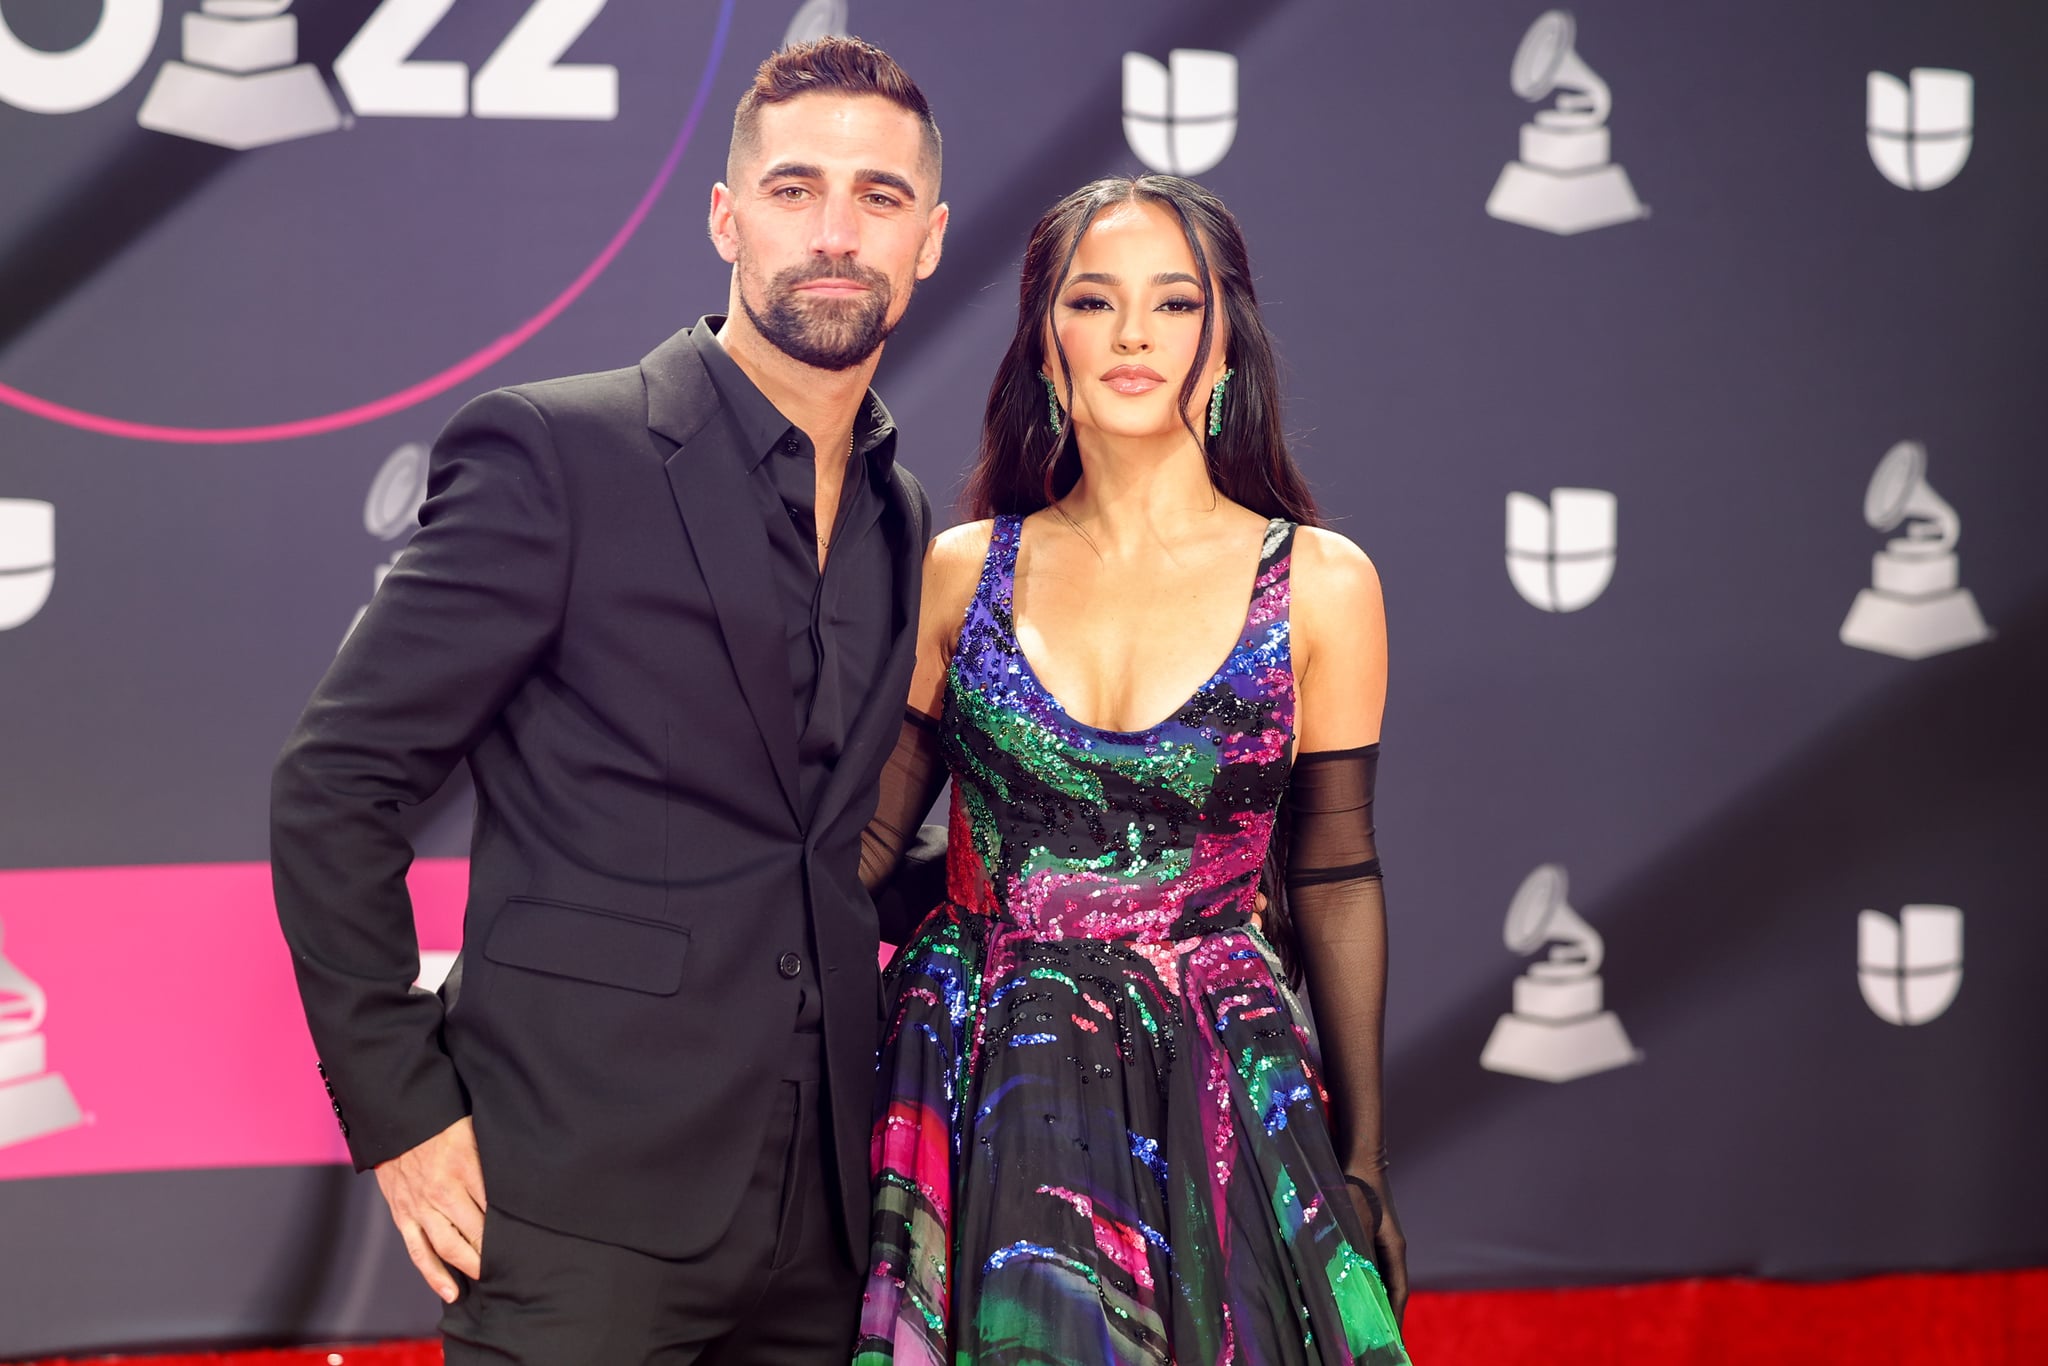 Sebastian Lletget (L) and Becky G at the 23rd Annual Latin Grammy Awards held at the Michelob Ultra Arena on November 17, 2022 in Las Vegas, Nevada. (Photo by Christopher Polk/Variety via Getty Images)